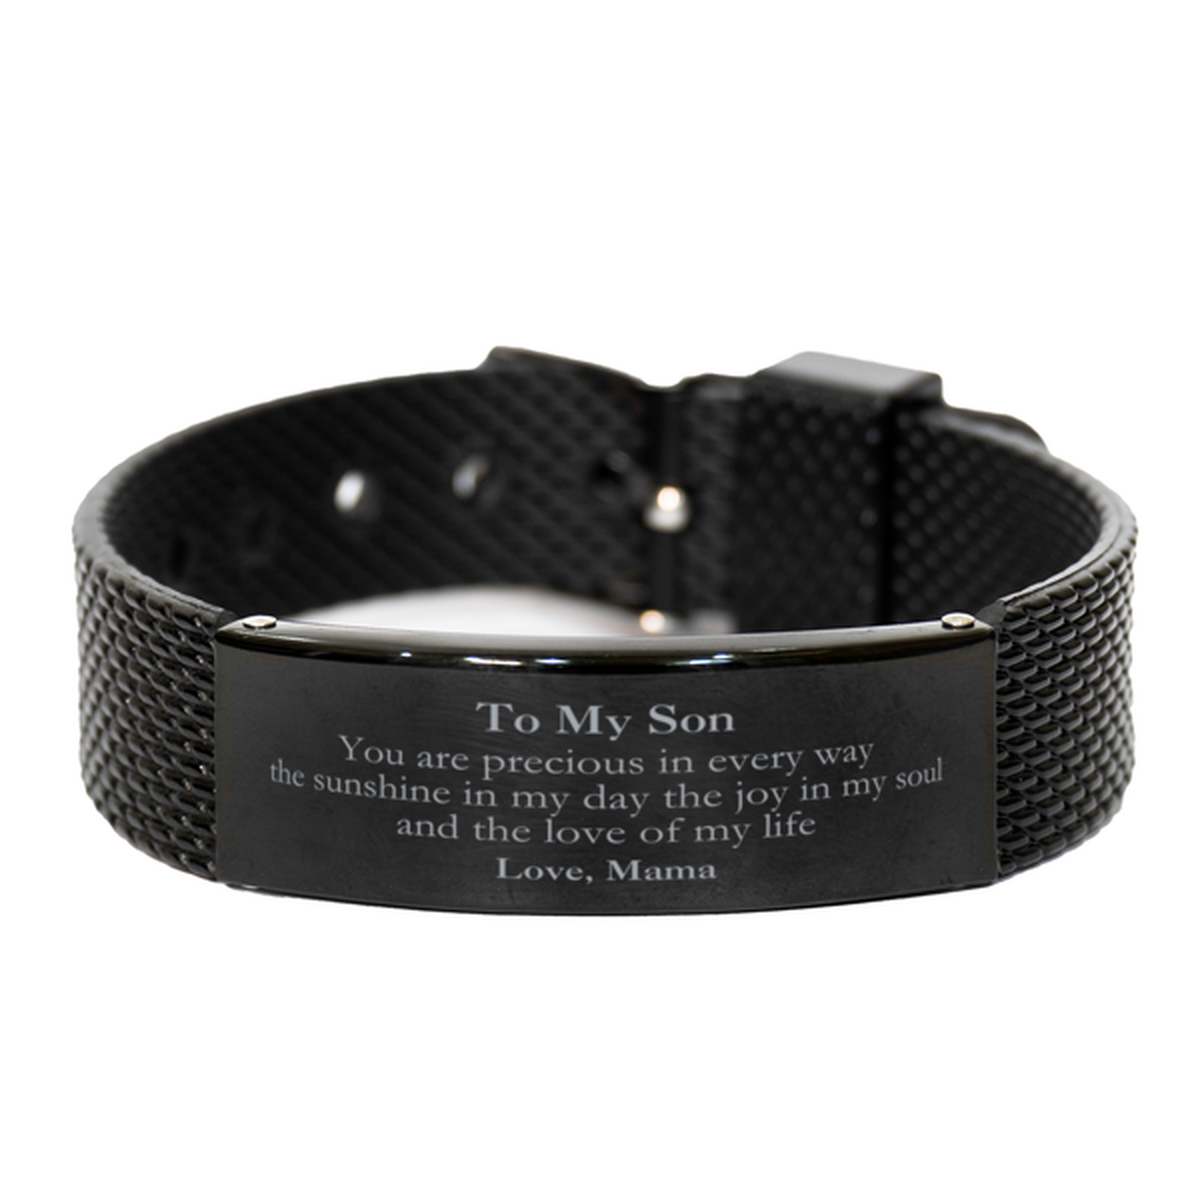 Graduation Gifts for Son Black Shark Mesh Bracelet Present from Mama, Christmas Son Birthday Gifts Son You are precious in every way the sunshine in my day. Love, Mama